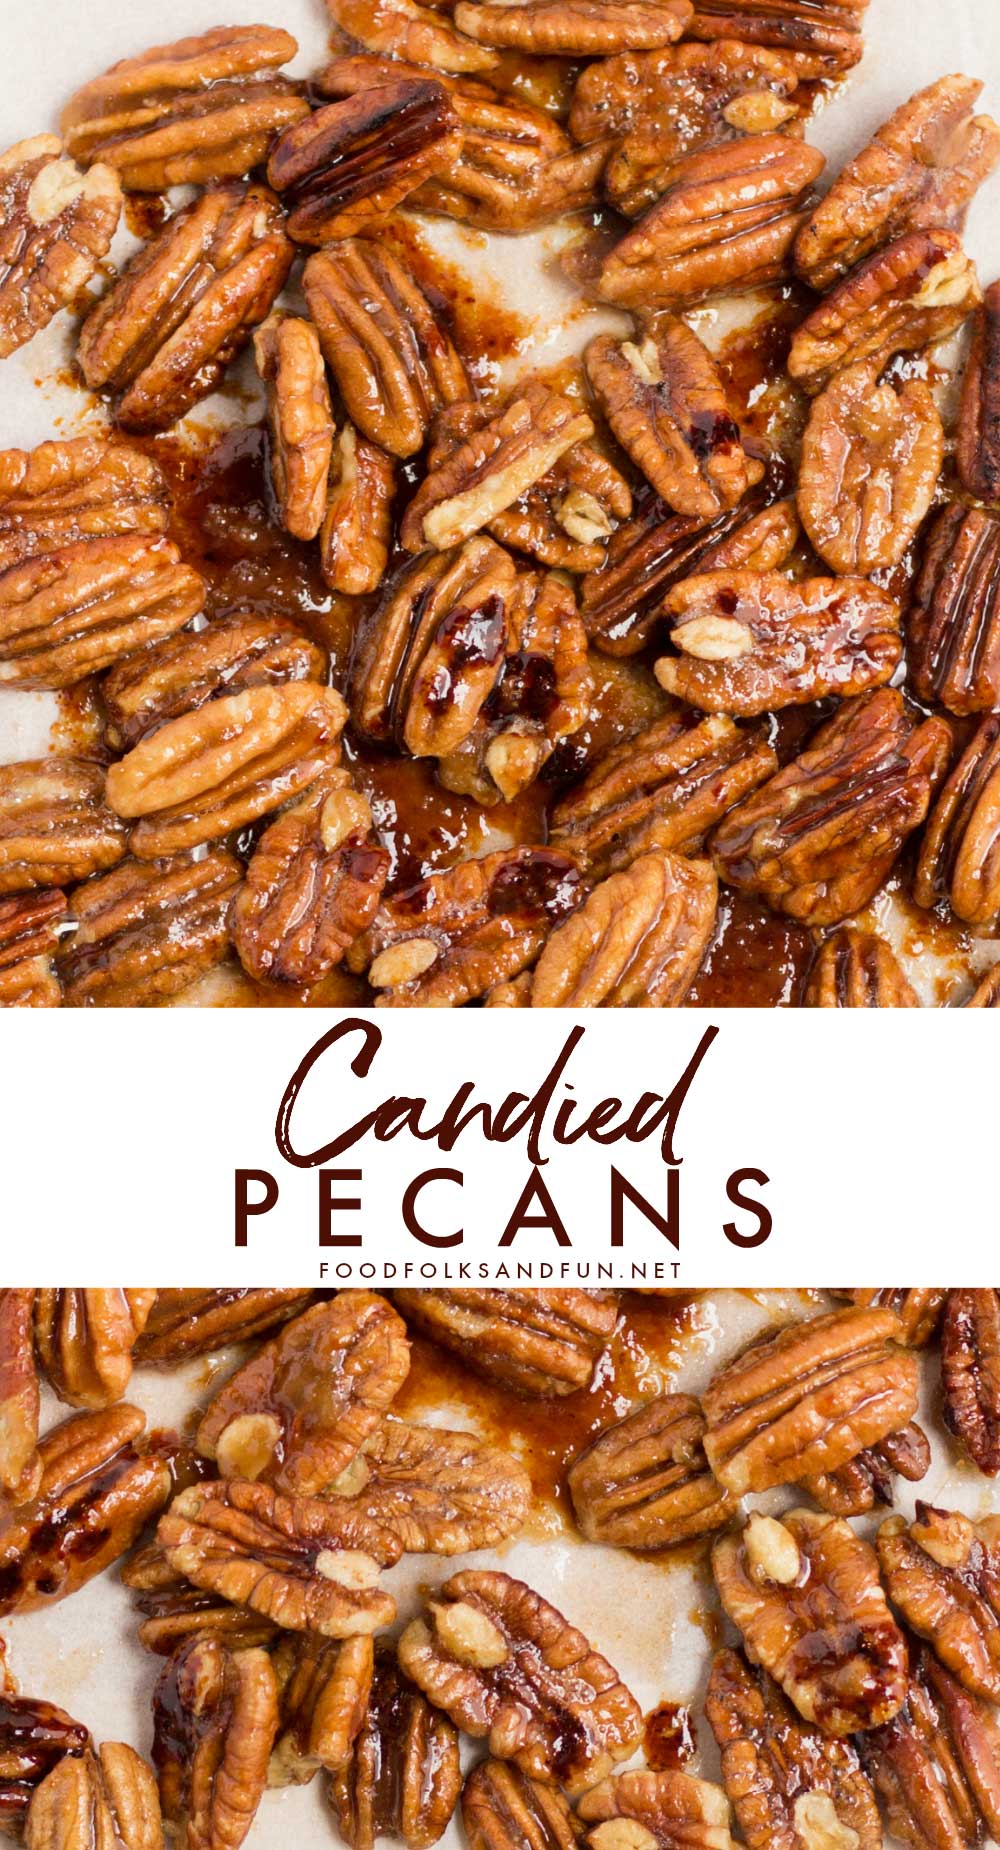 Candied pecans with text overlay for Pinterest